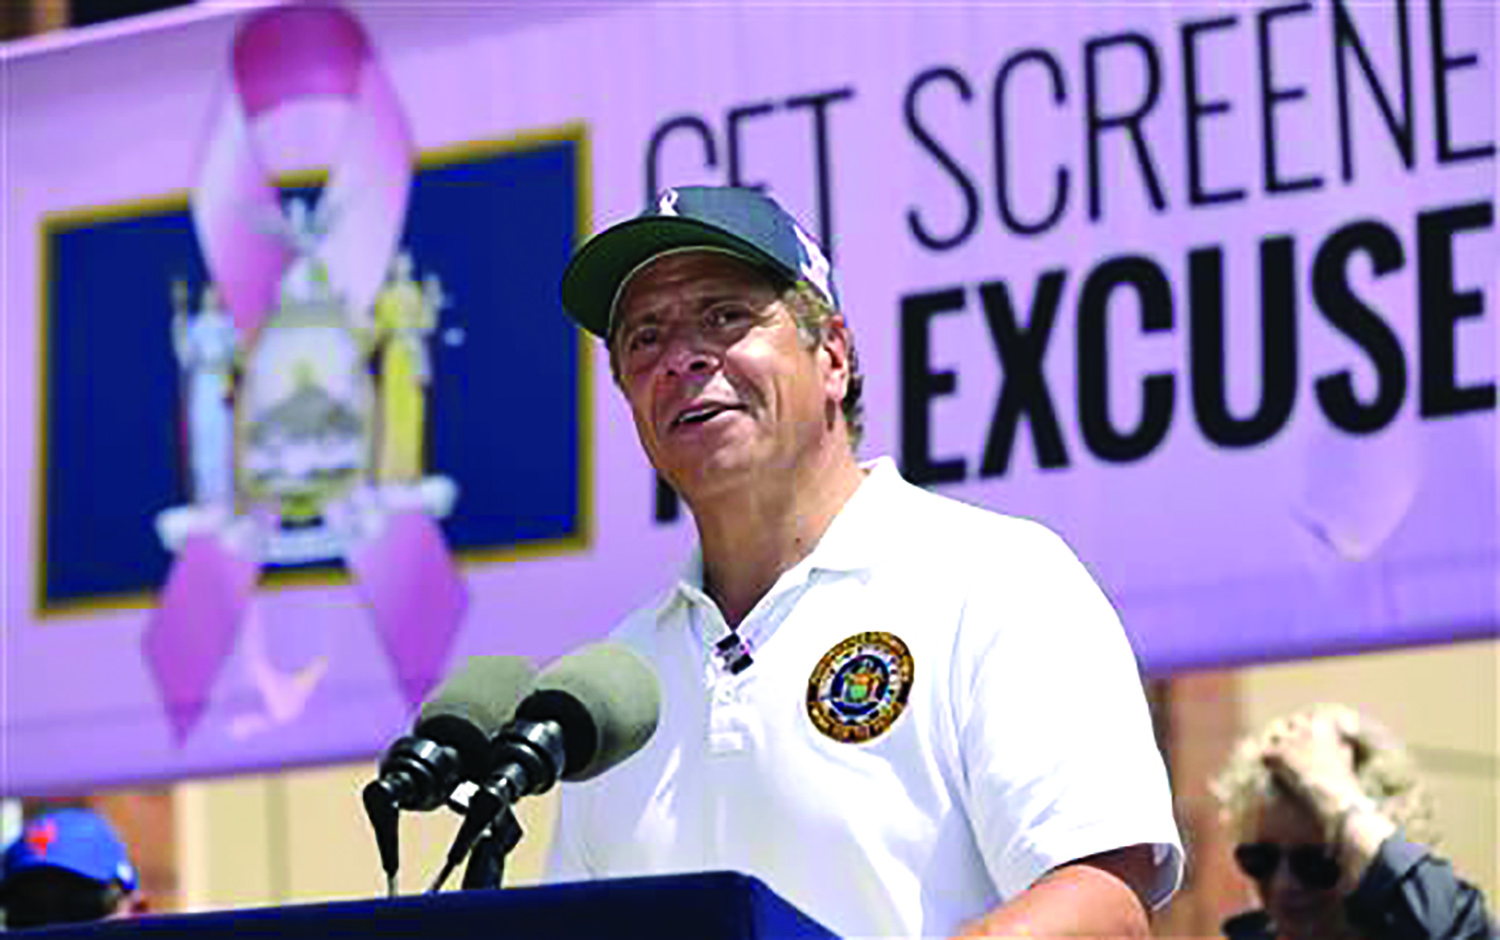 New York is expanding access to breast cancer screening by requiring hospitals to extend hours for mammograms and eliminating insurance costs for the procedure. Democratic Gov. Andrew Cuomo signed the measure into law at a ceremony on Long Island.